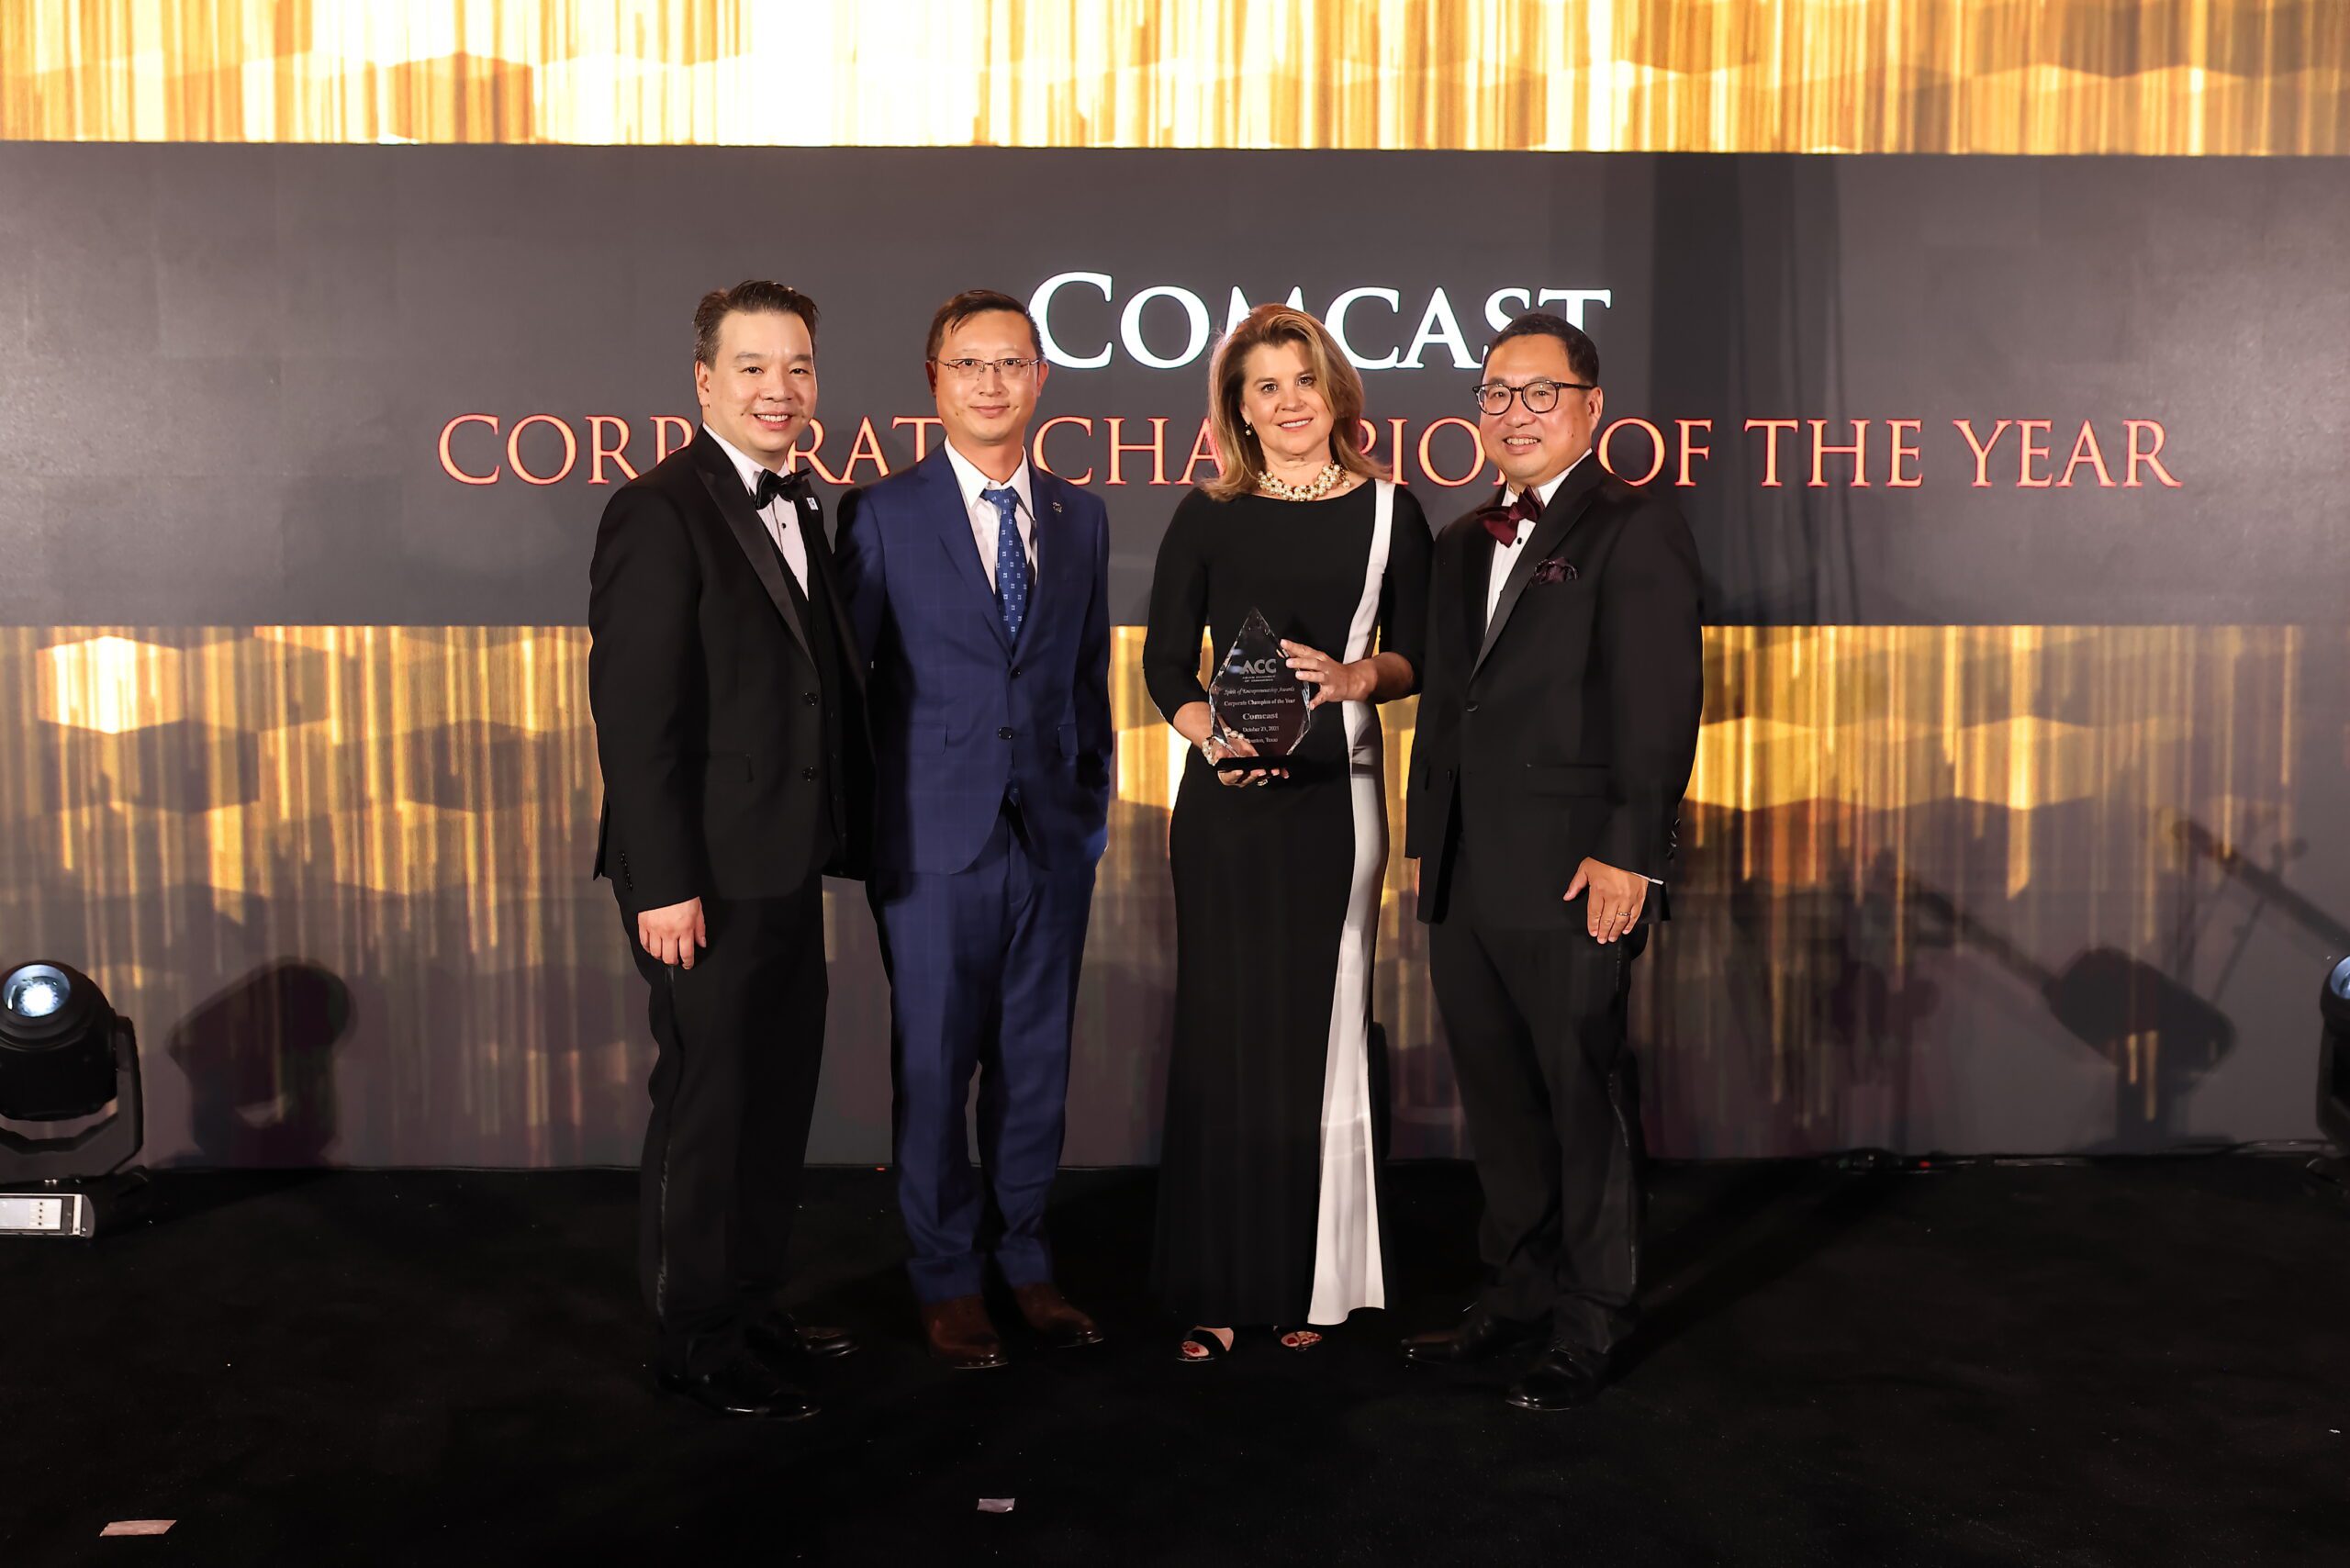 Four people standing in front of a 'Corporate Champion of the Year' sign.